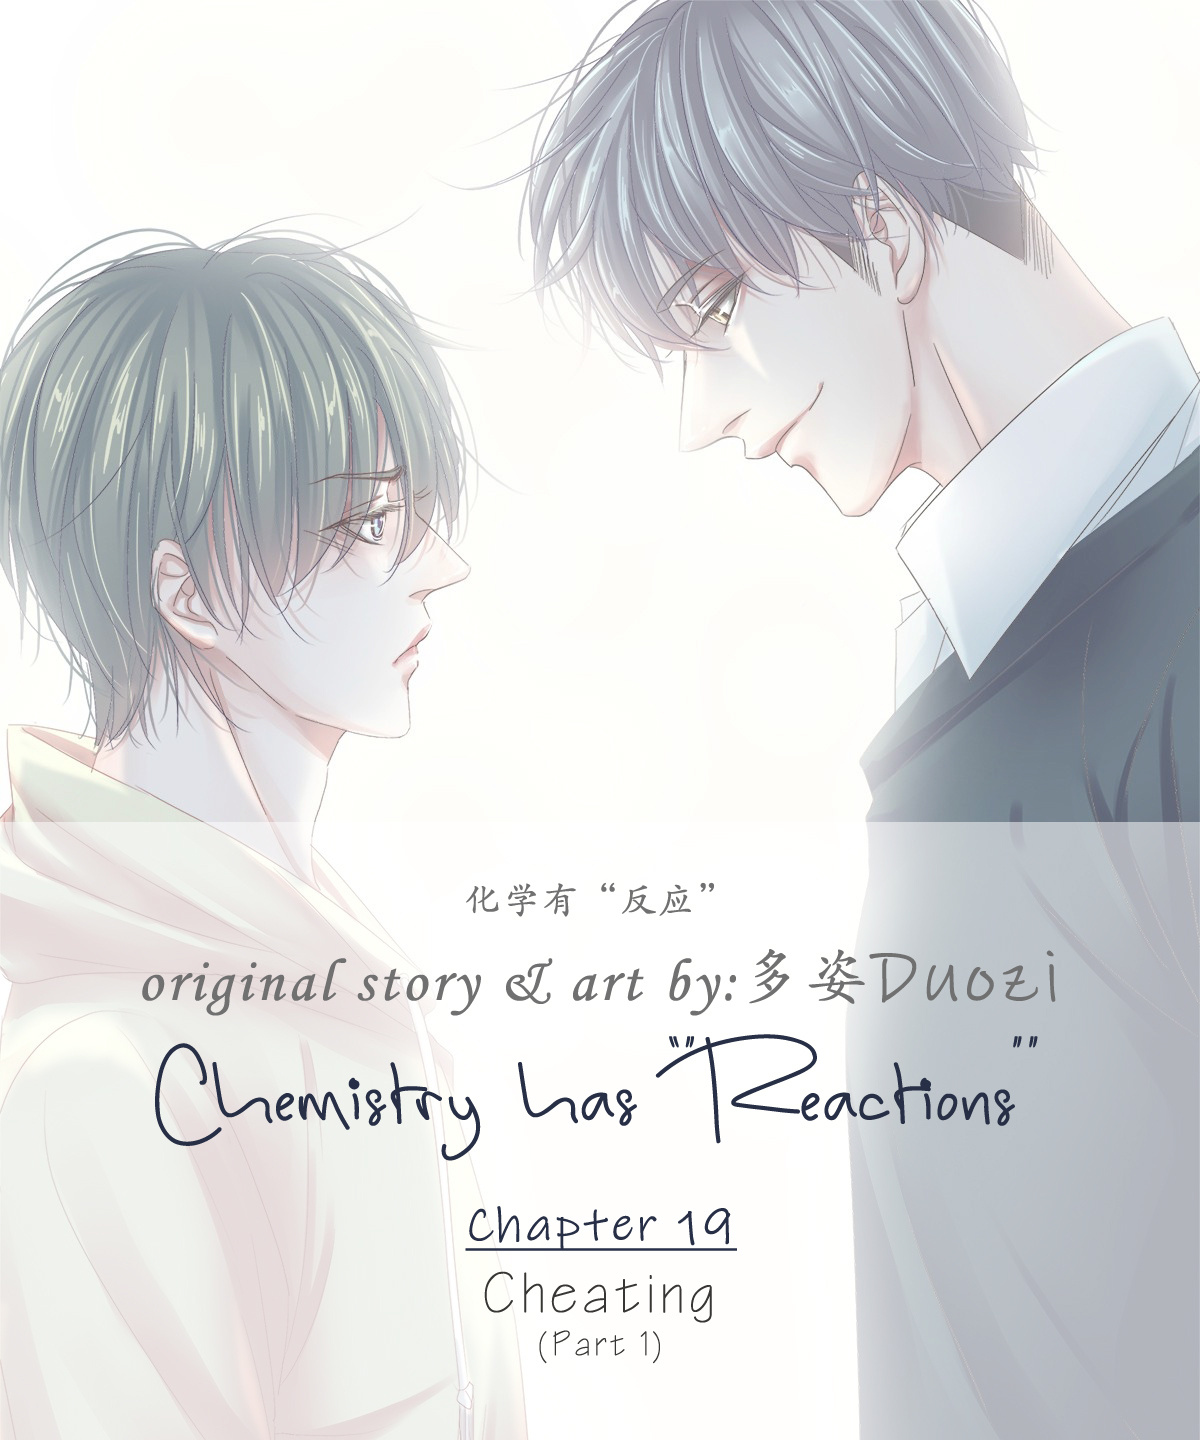 Chemistry Has "reactions" Chapter 19 #1